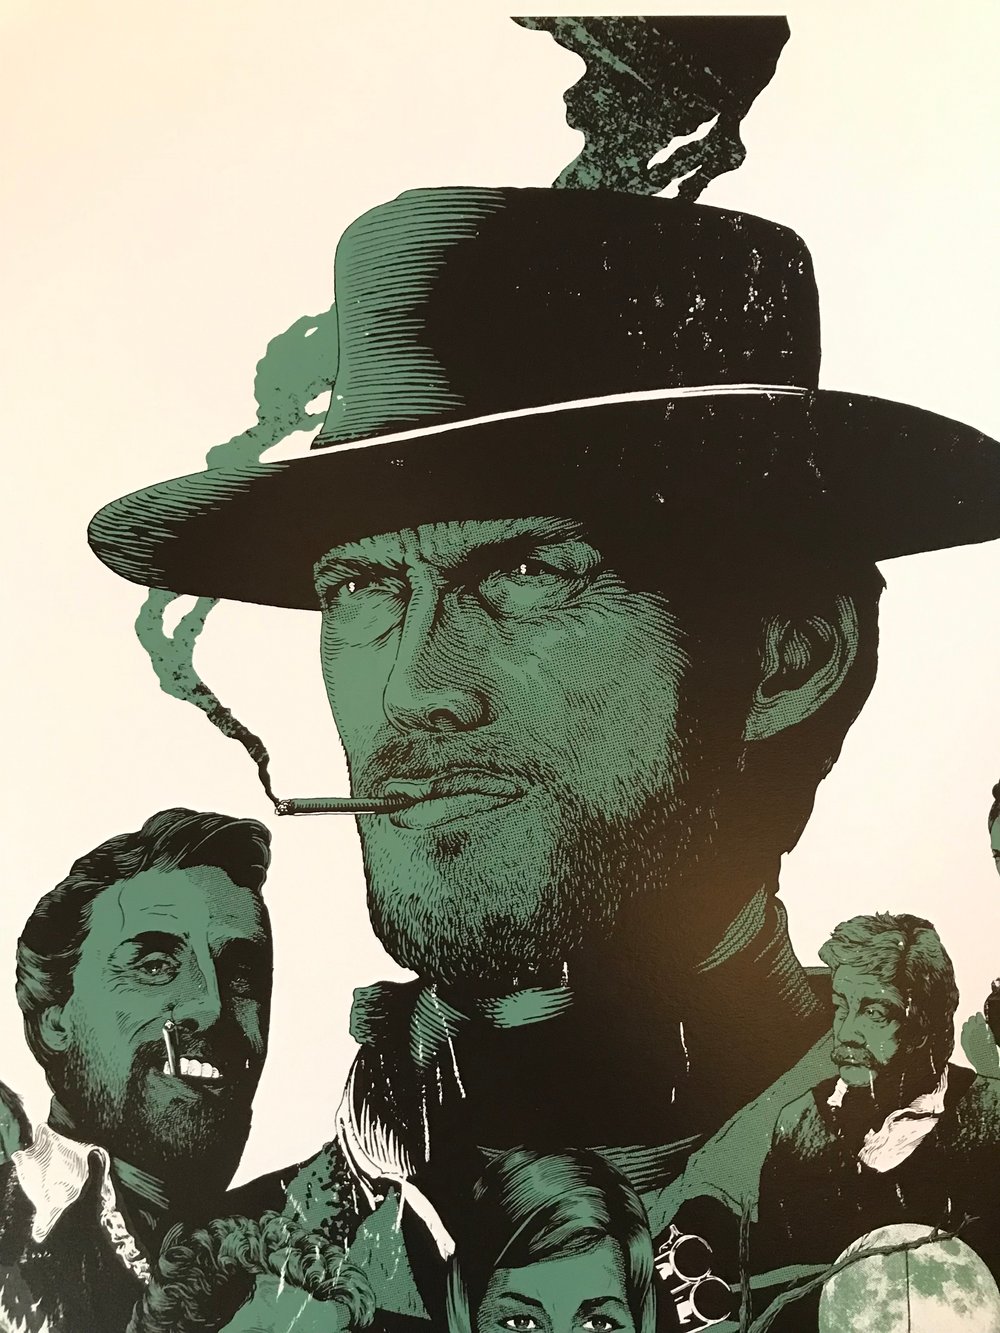 A fistful of Dollars -Artist Proofs